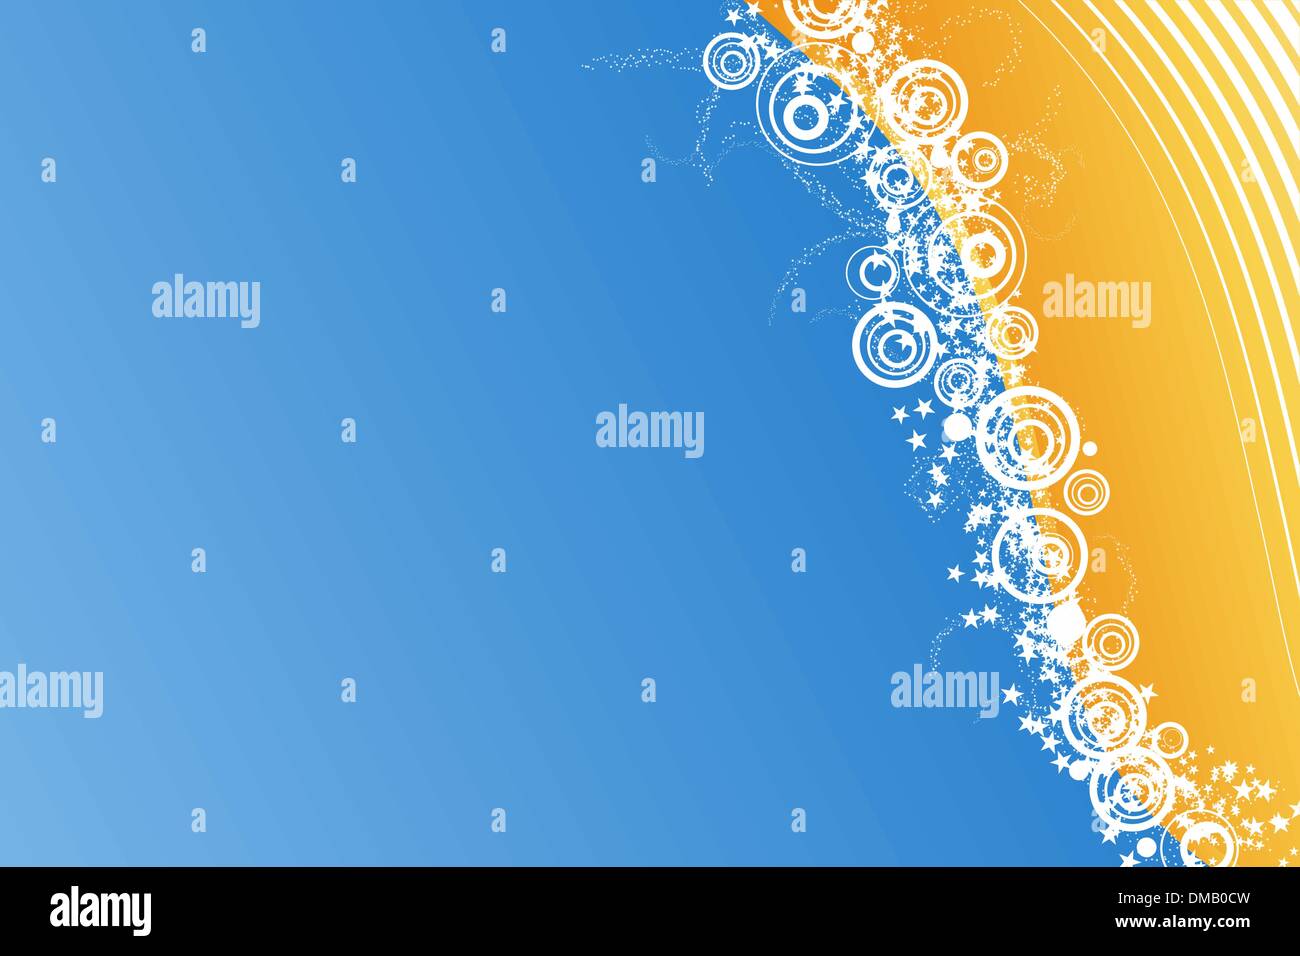 Blue celebration background with millions of stars Stock Vector